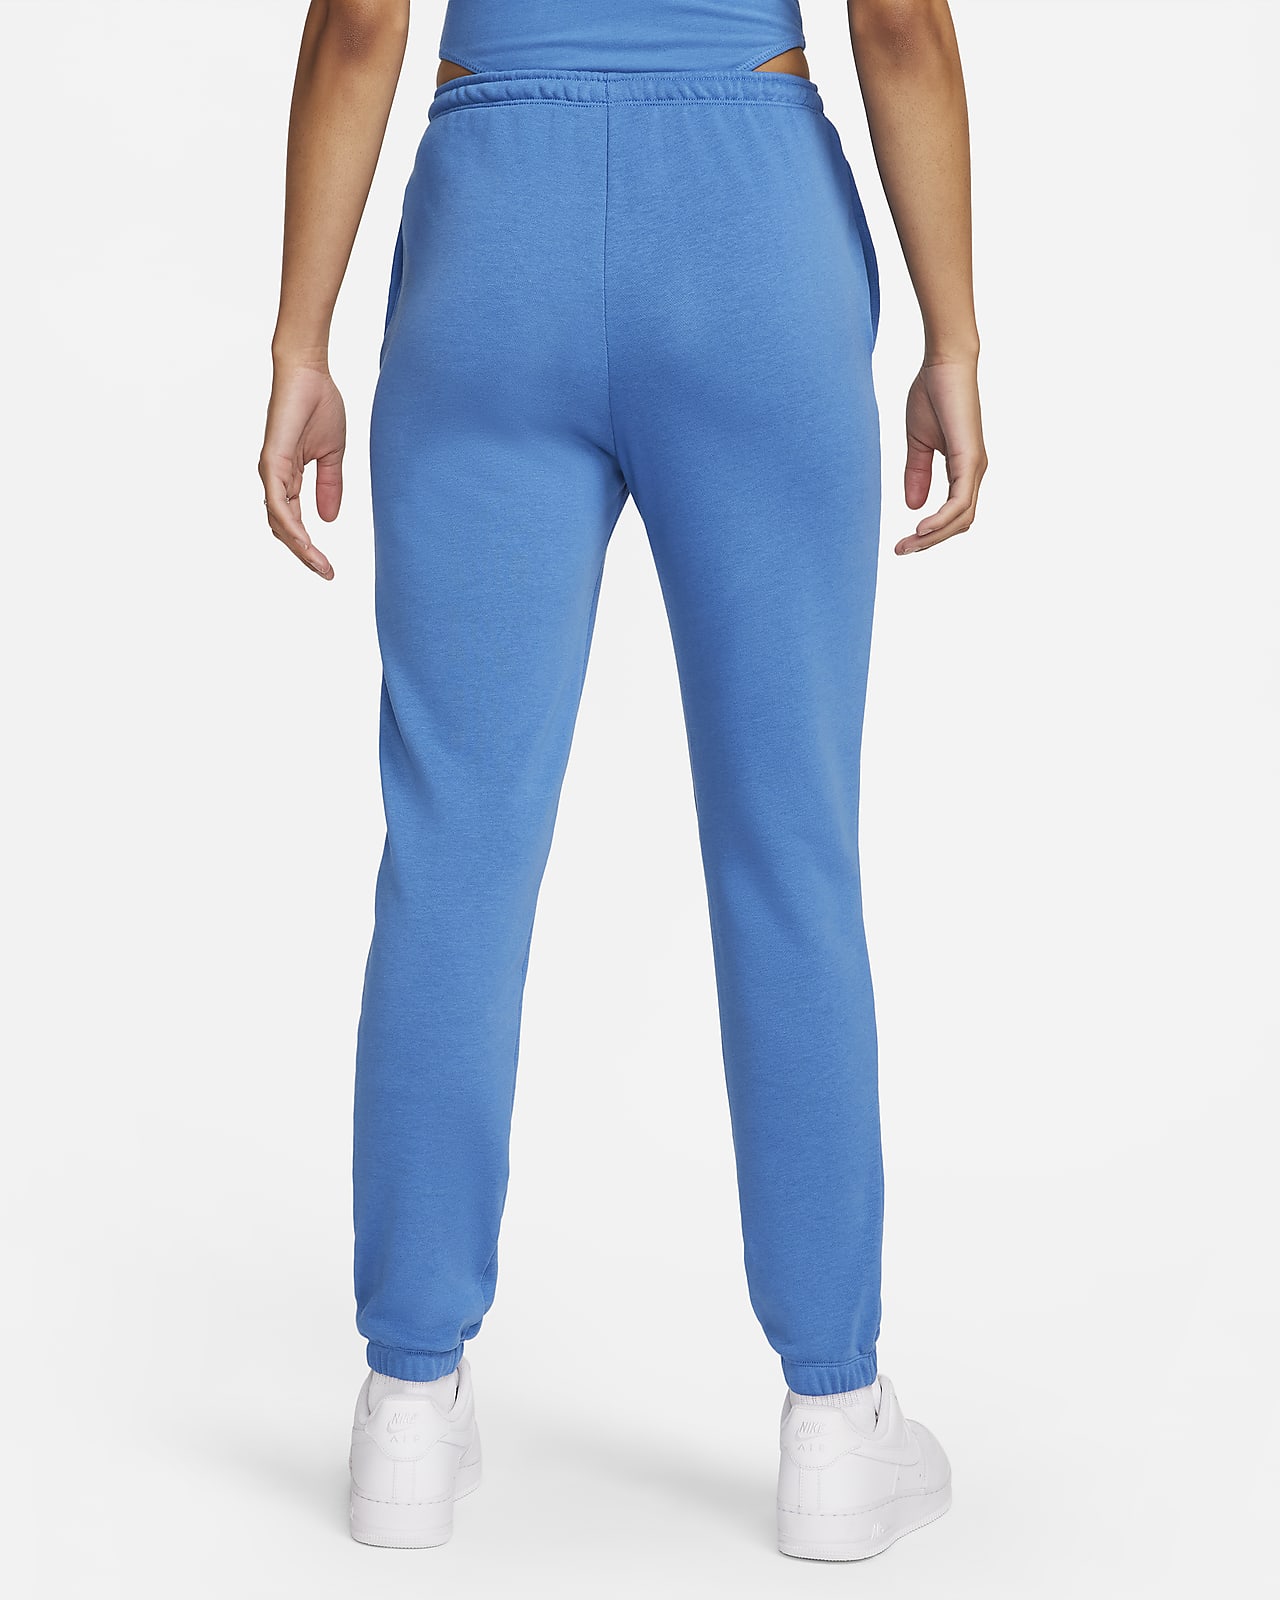 Nike Sportswear Chill Terry Women's Slim High-Waisted French Terry  Sweatpants.